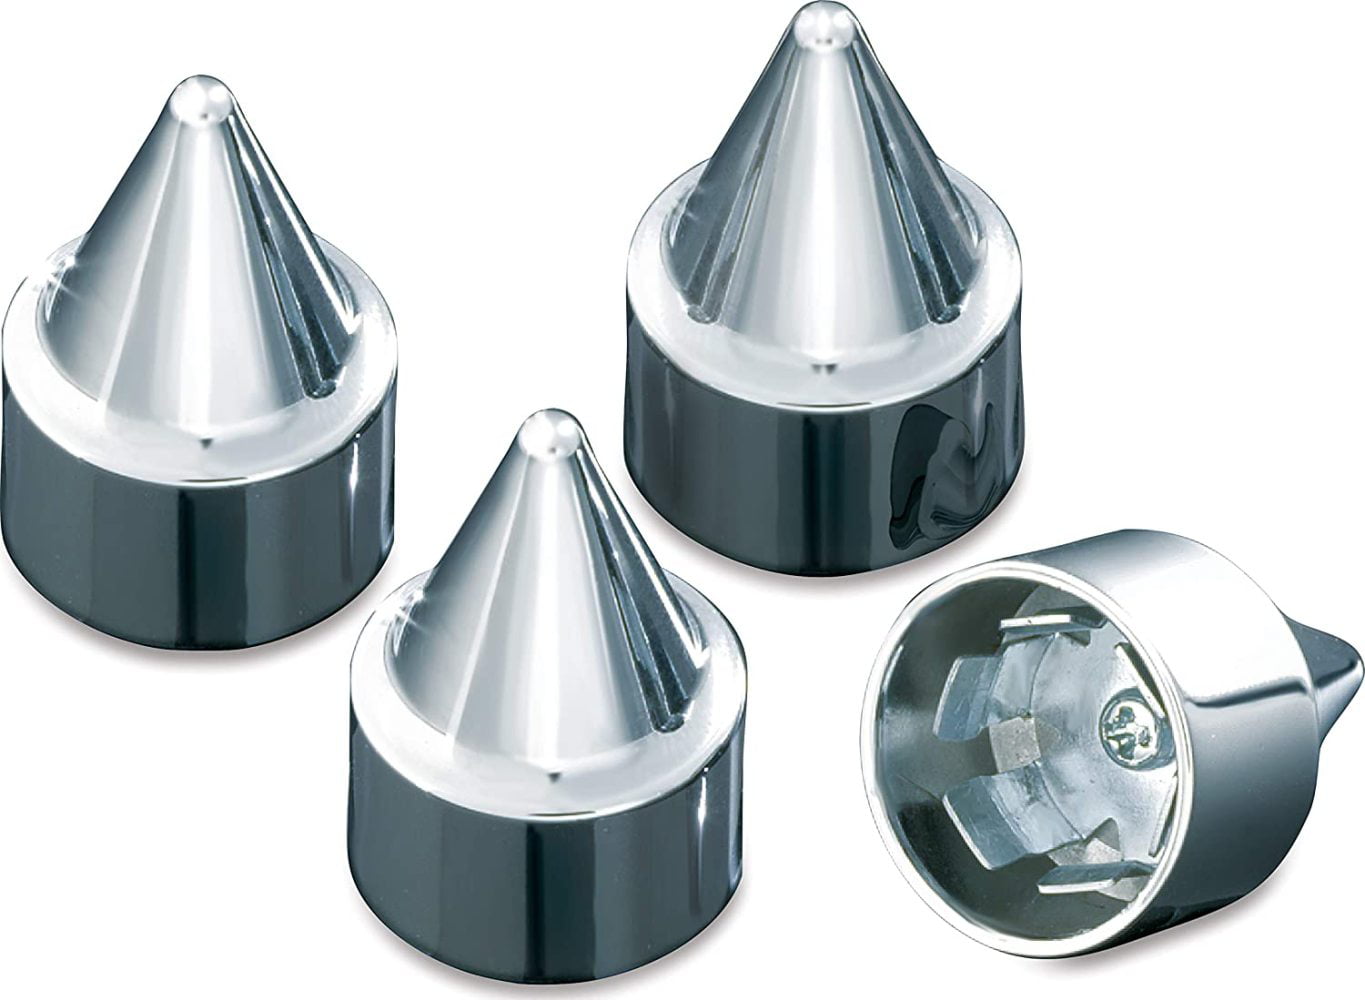 Stiletto Rocker Box Bolt Cover Caps for 1999-2019 Harley-Davidson Motorcycles Pack of 4 Kuryakyn 8144 Motorcycle Accent Accessory Chrome 